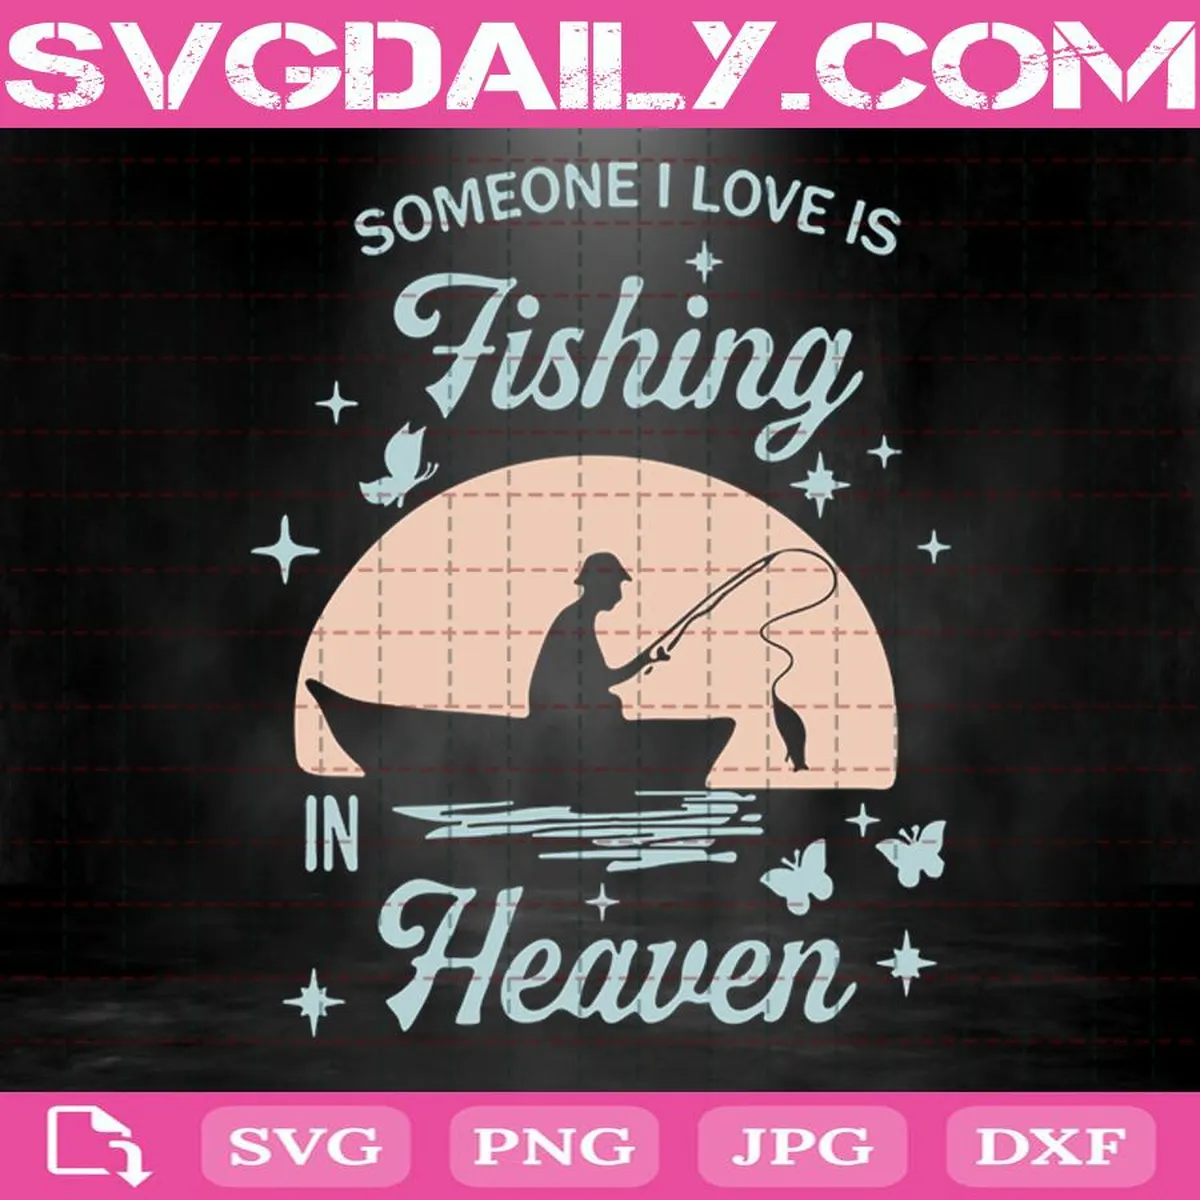 Someone I Love Is Fishing In Heaven Svg, Fishing Life Svg, Fish Svg, Fishermen Svg, Heaven Svg, Svg Png Dxf Eps AI Instant Download